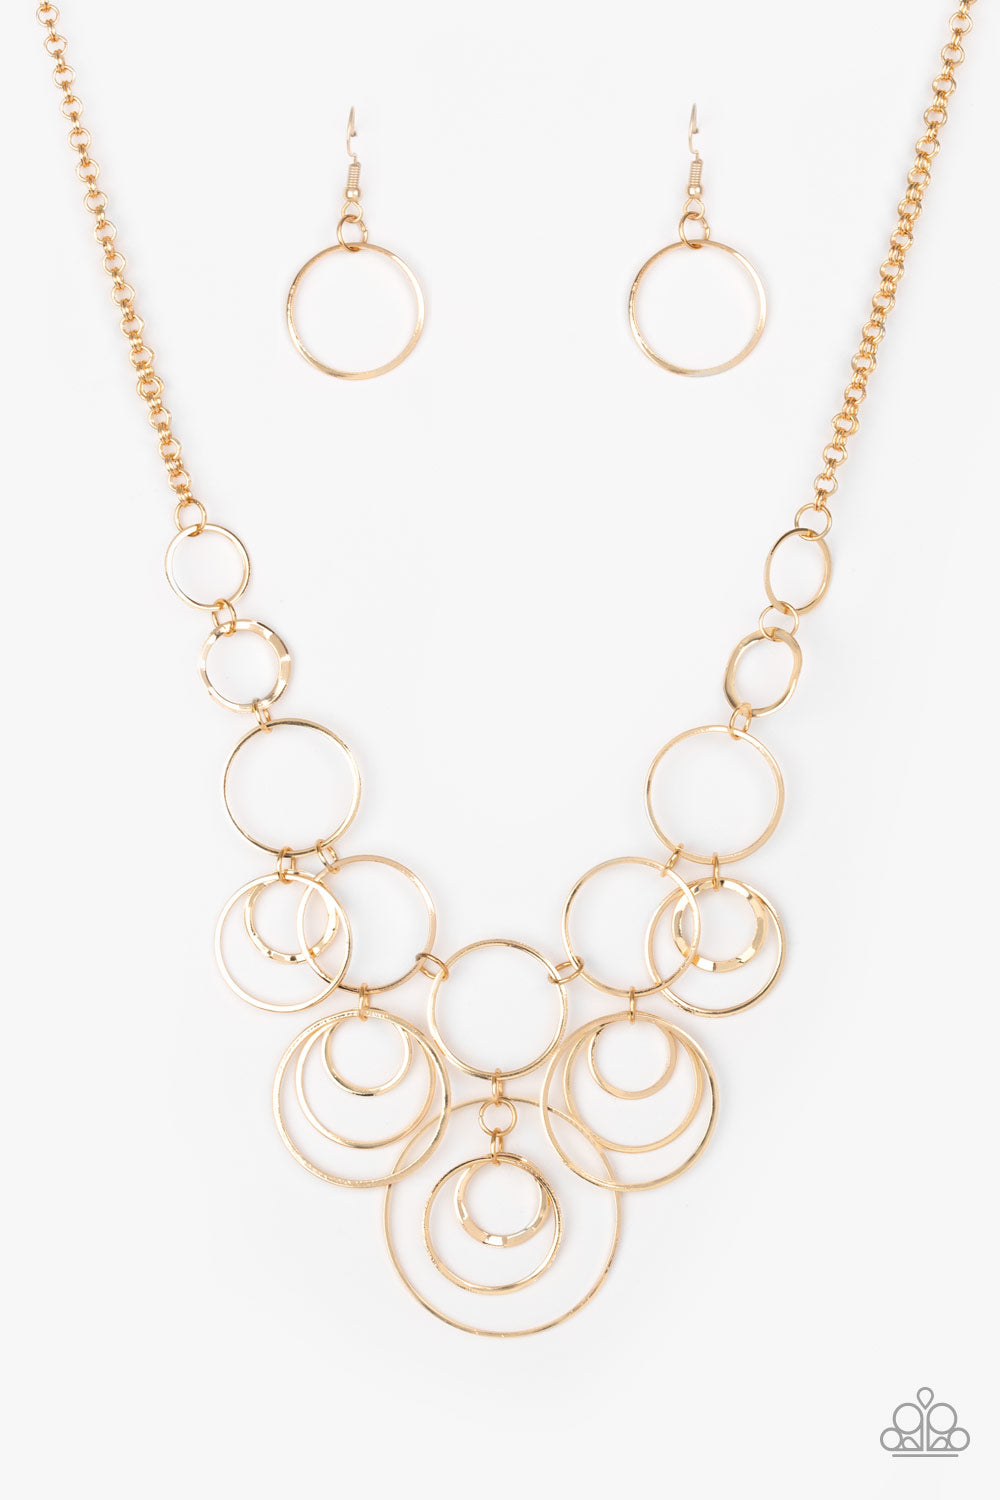 Paparazzi - Break The Cycle - Gold Necklace